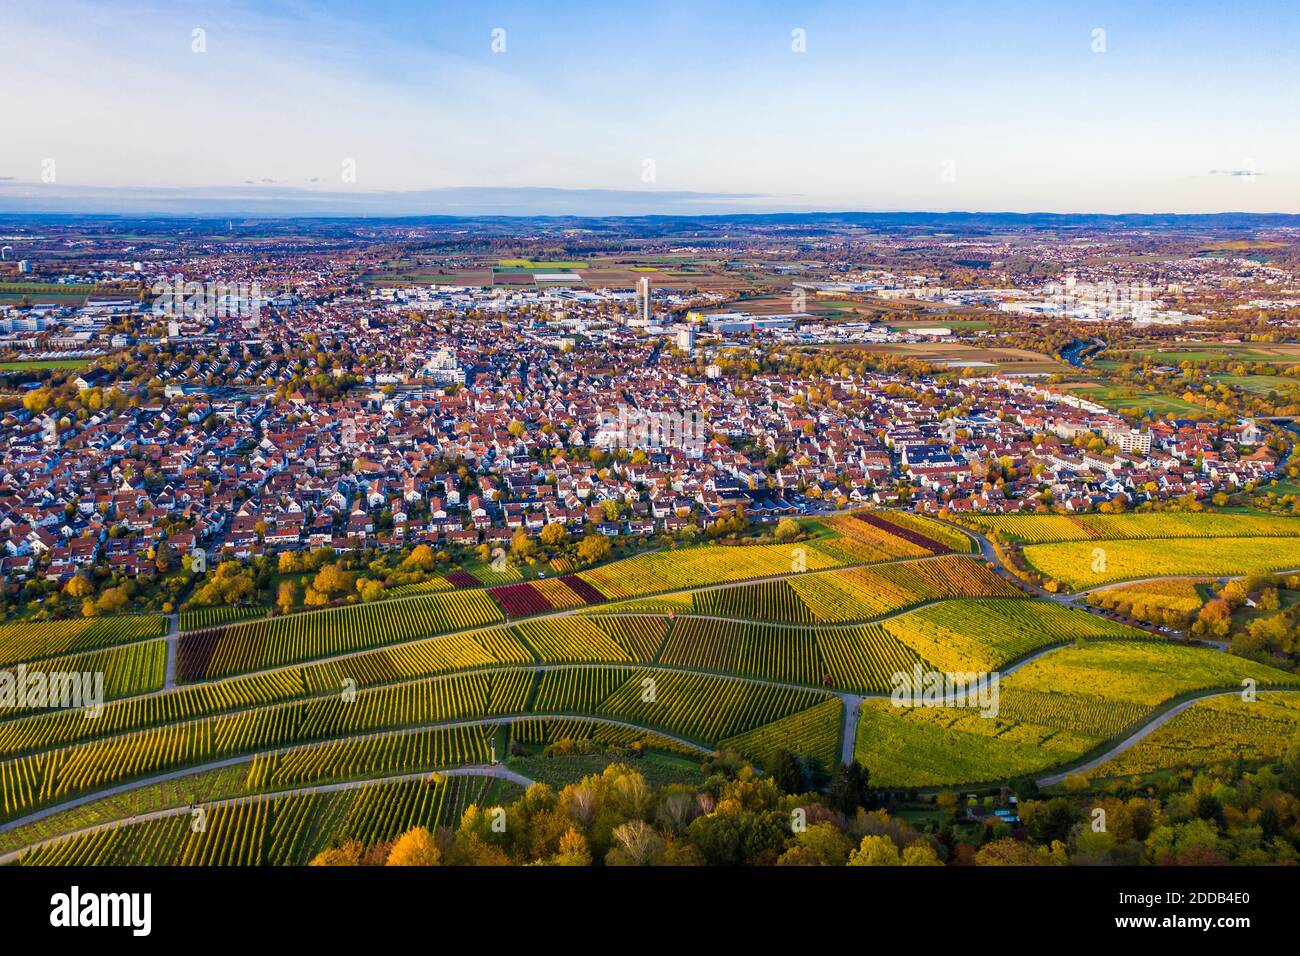 Germany, Baden-Wurttemberg, Stuttgart, Aerial view of vast vineyards in front of countryside town in autumn Stock Photo